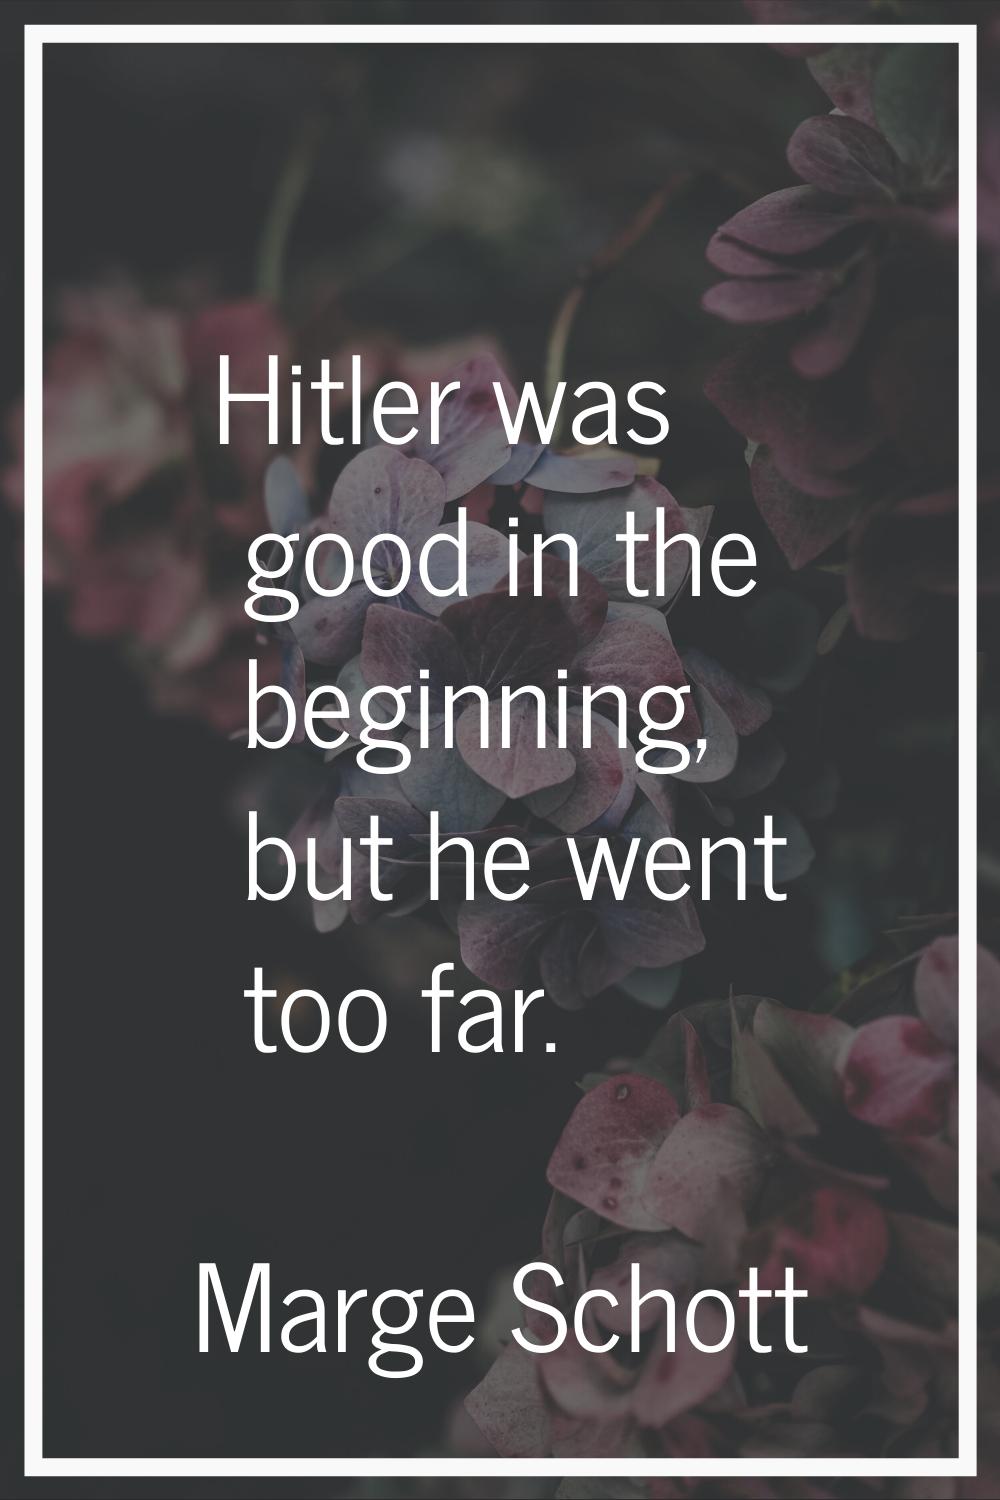 Hitler was good in the beginning, but he went too far.